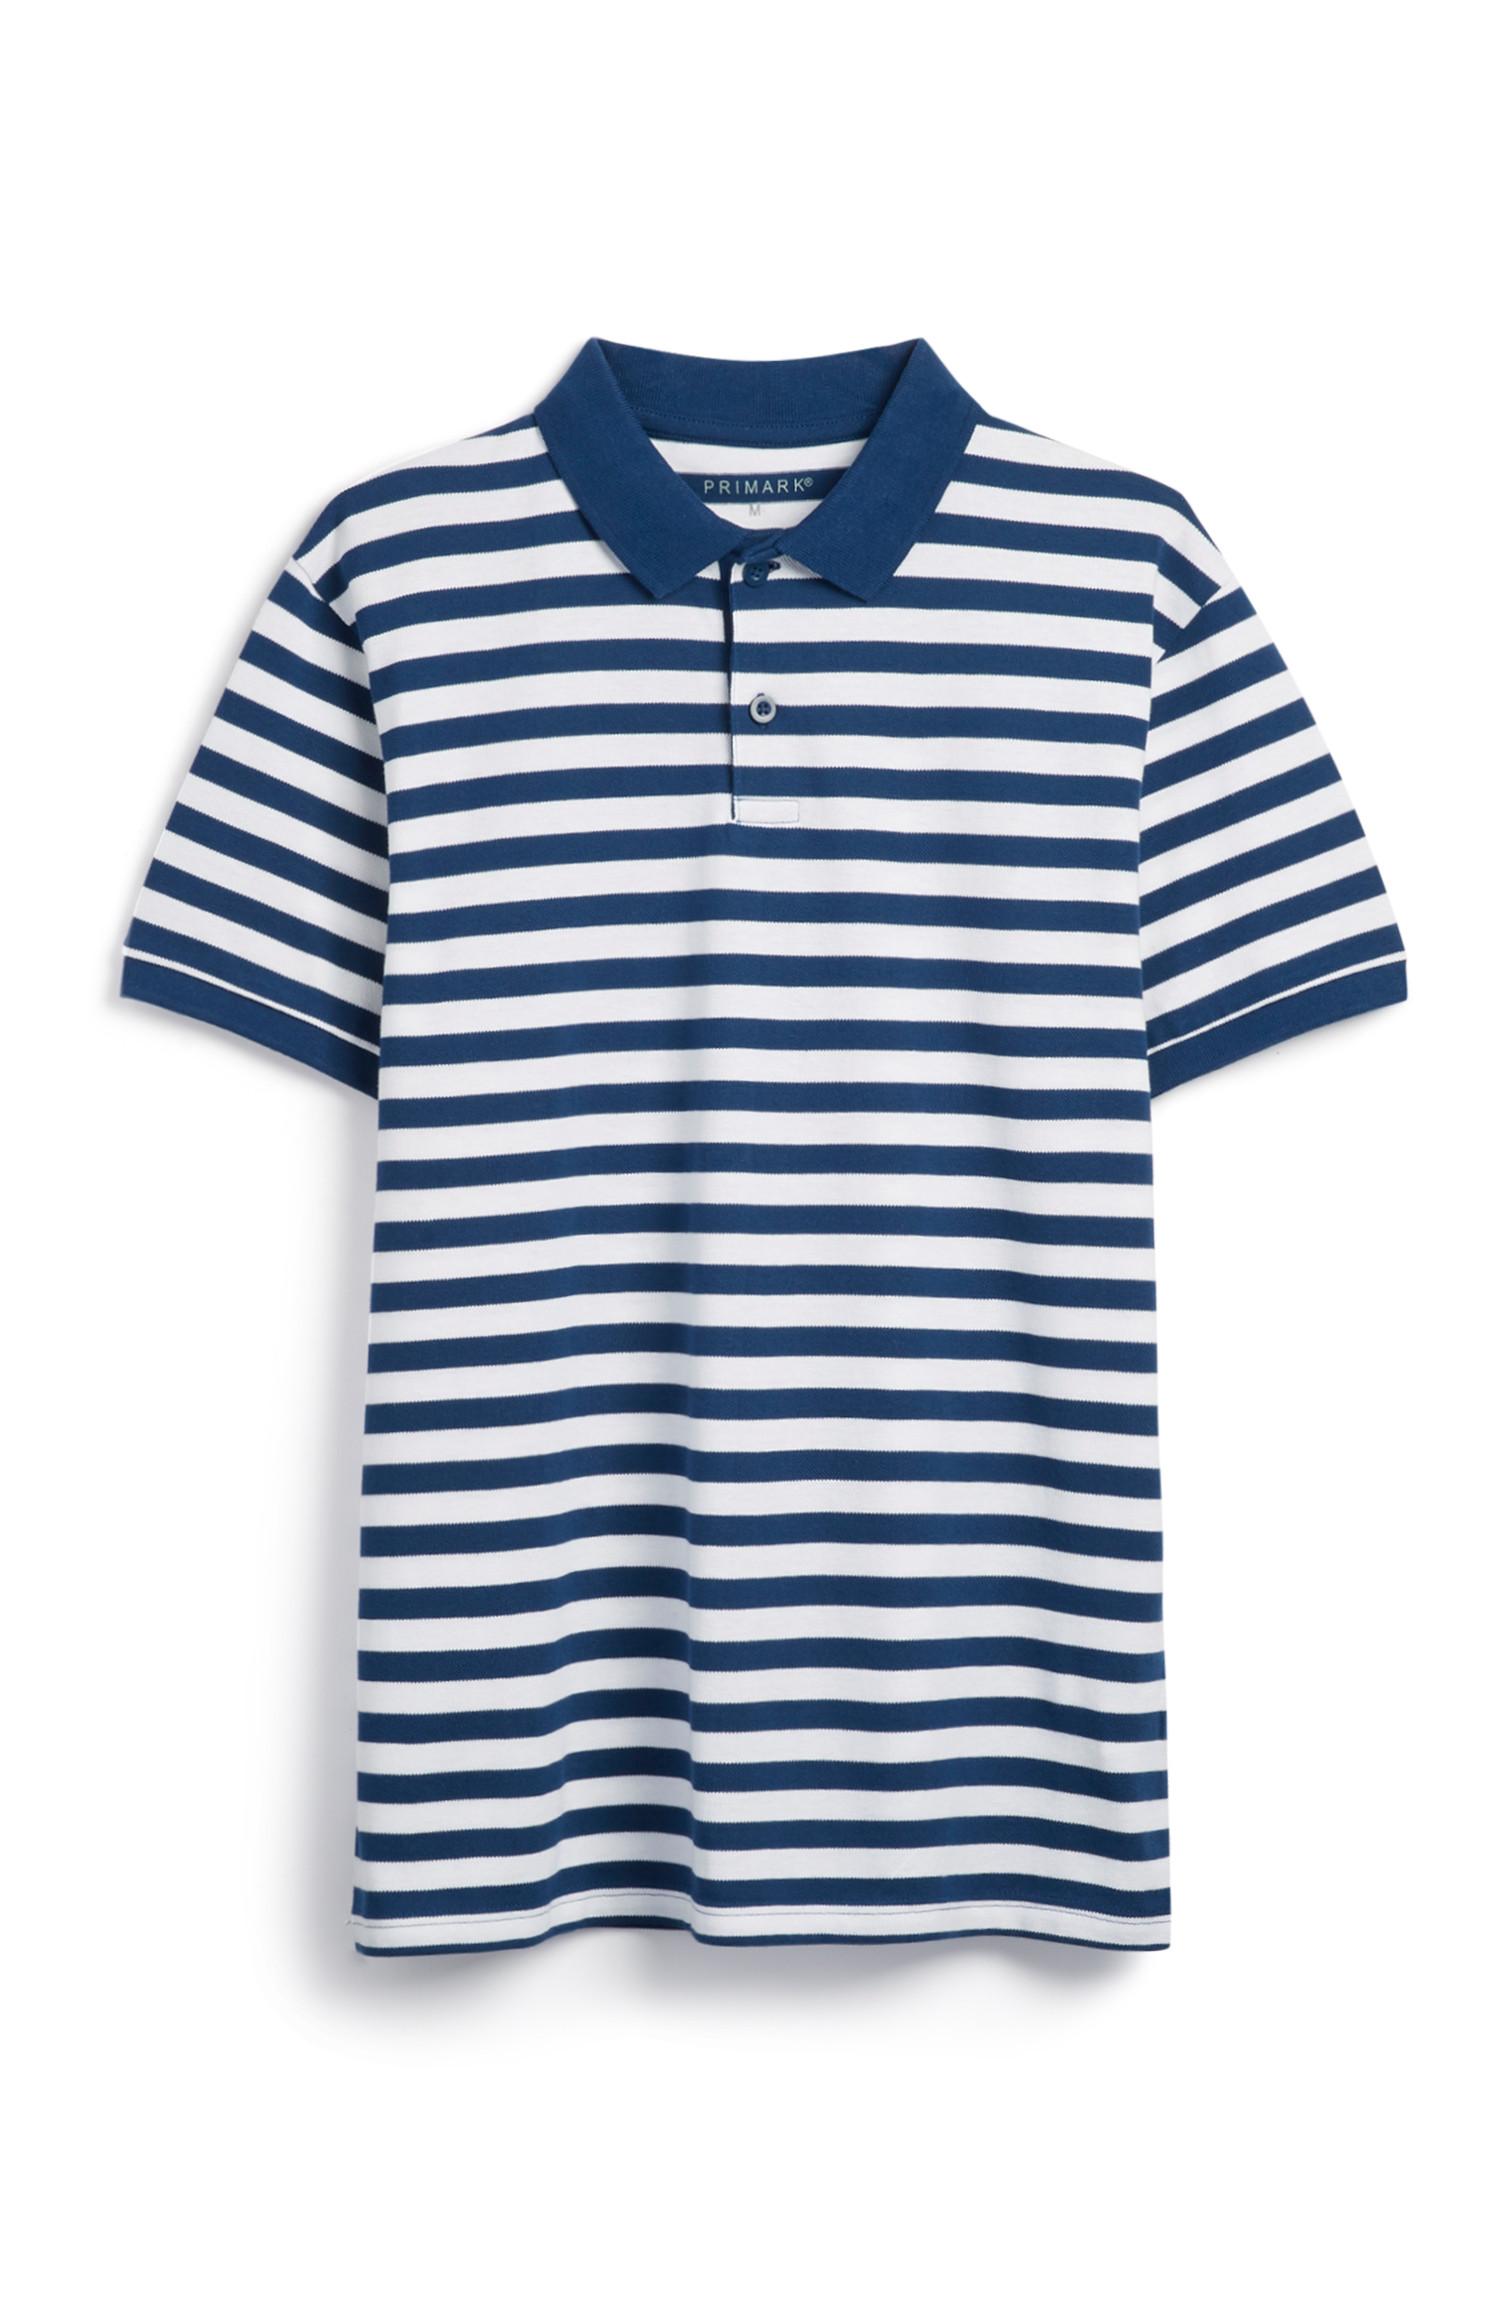 Navy Stripe Polo Top | Polo | Tops & Tshirts | Mens | Categories ...